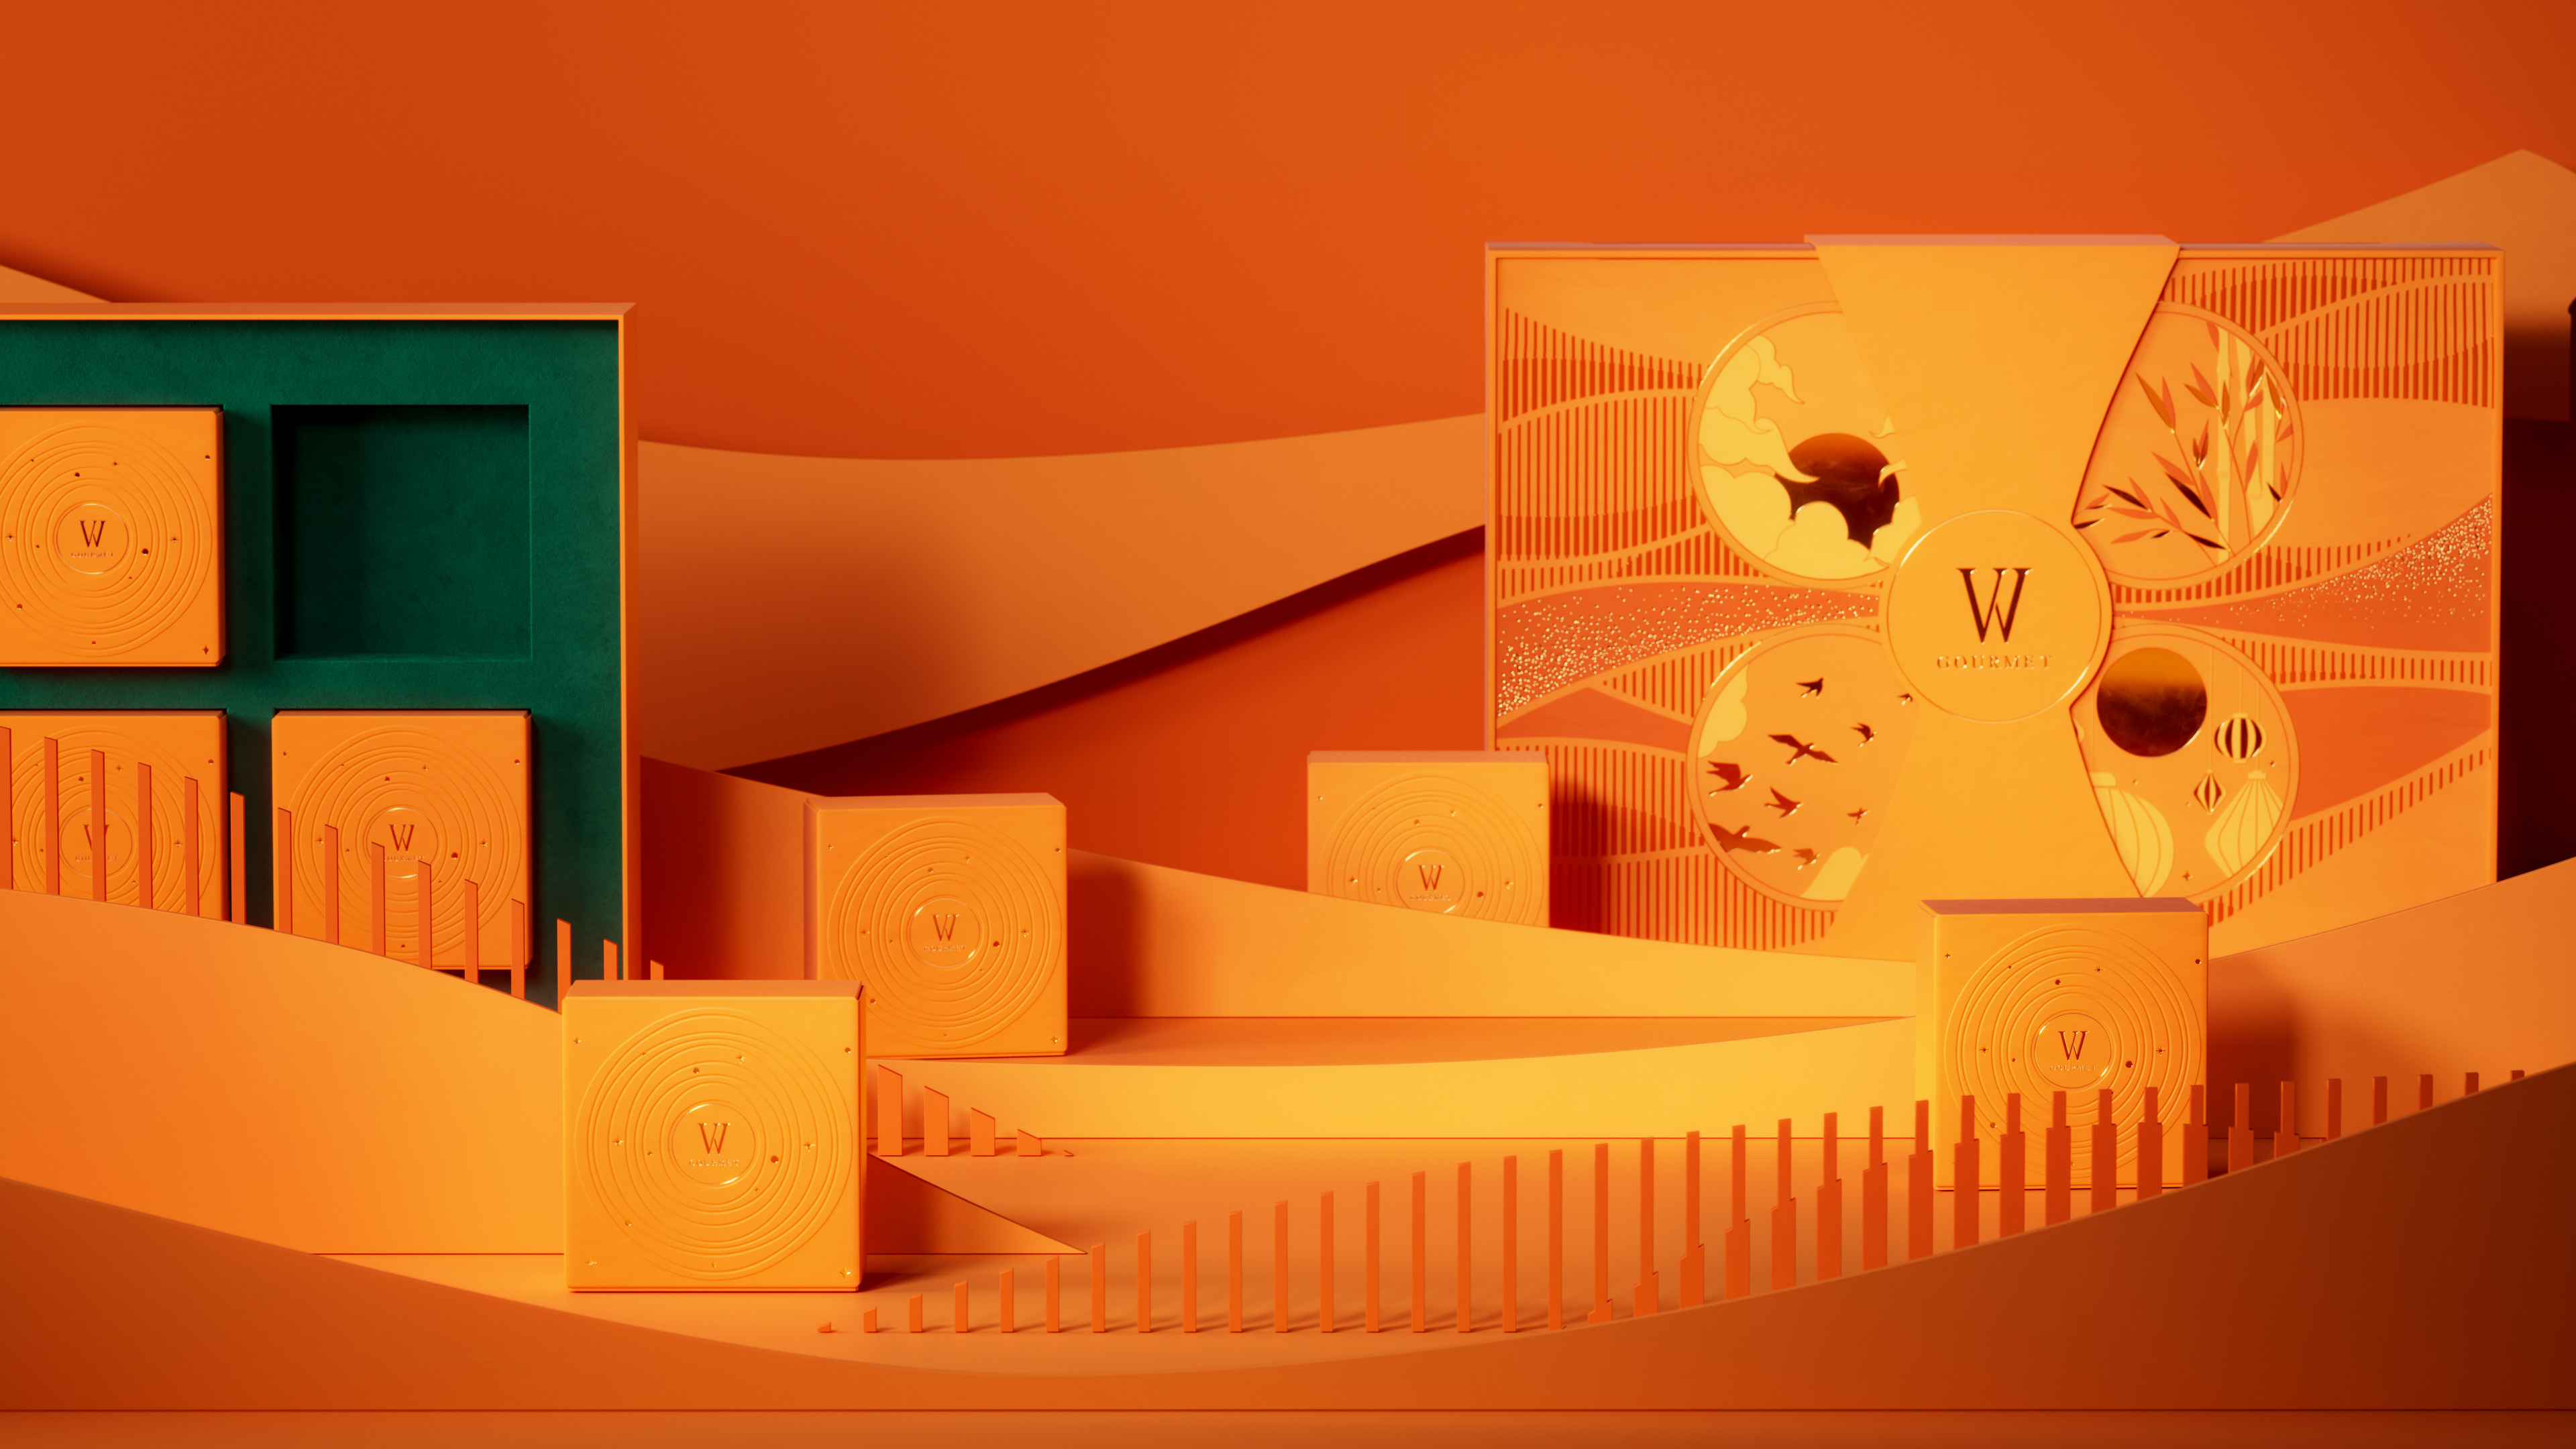 Bracom Agency “Plays” an Autumn Melody on Their Mooncake Packaging Design for W Gourmet